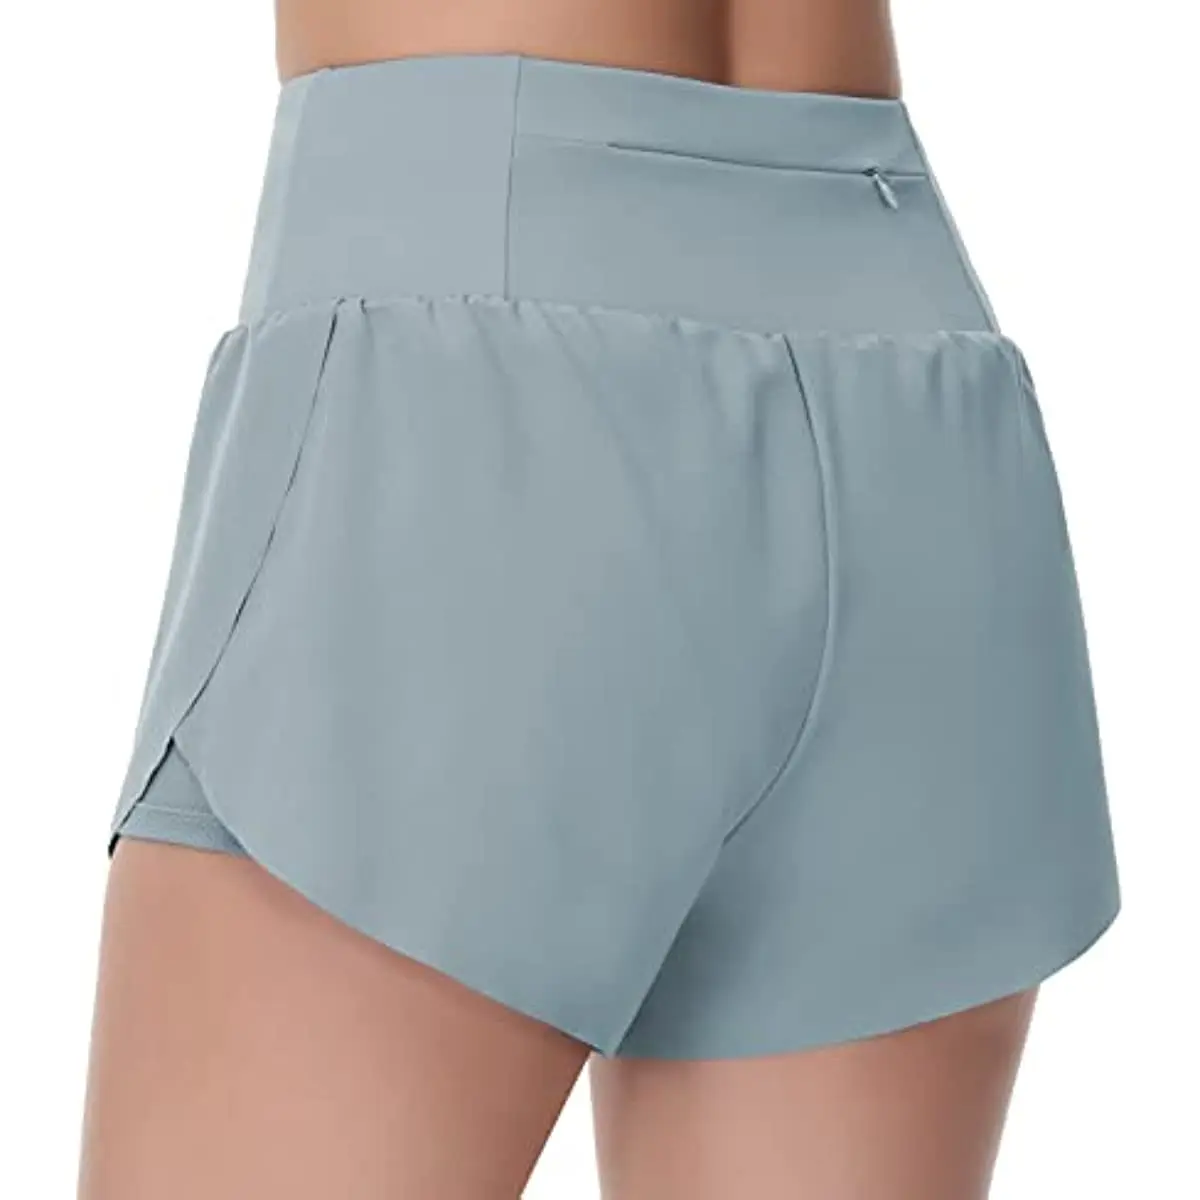 

THE GYM PEOPLE Women’s Quick Dry Running Shorts Mesh Liner High Waisted Tennis Workout Shorts Zipper Pockets